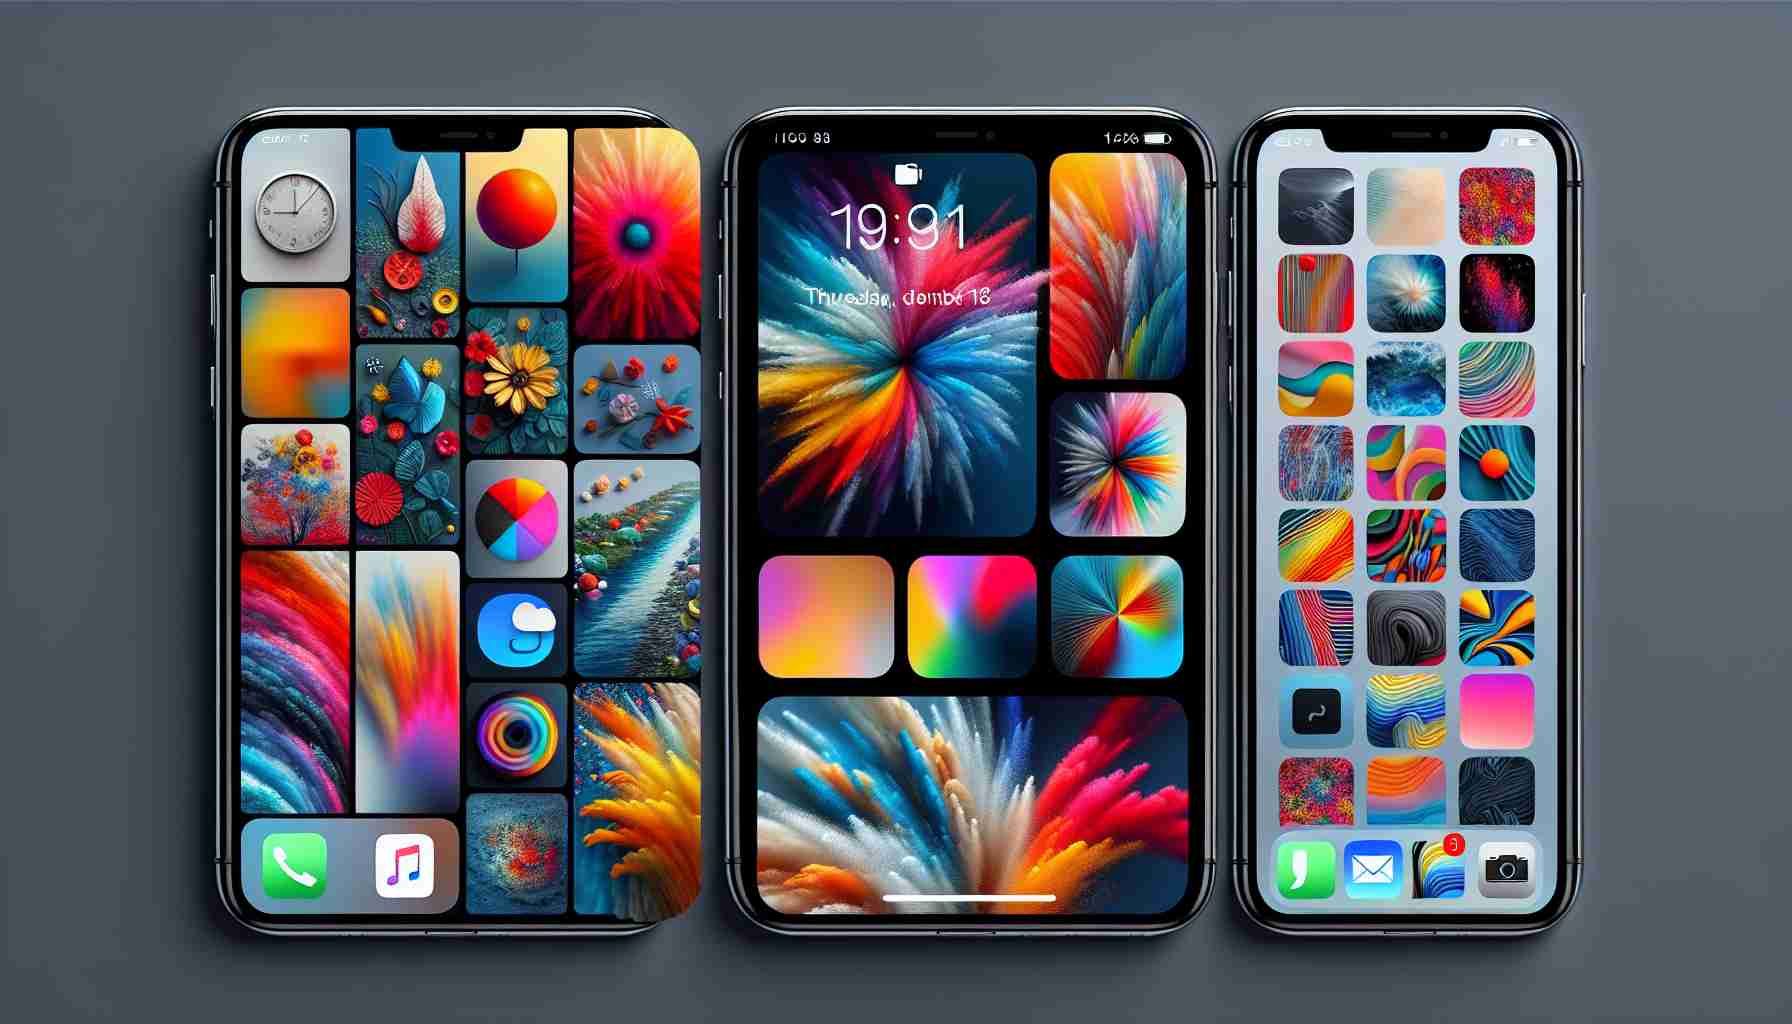 Apple Unleashes iOS 18 with Striking New Wallpaper Options for iPhone Users